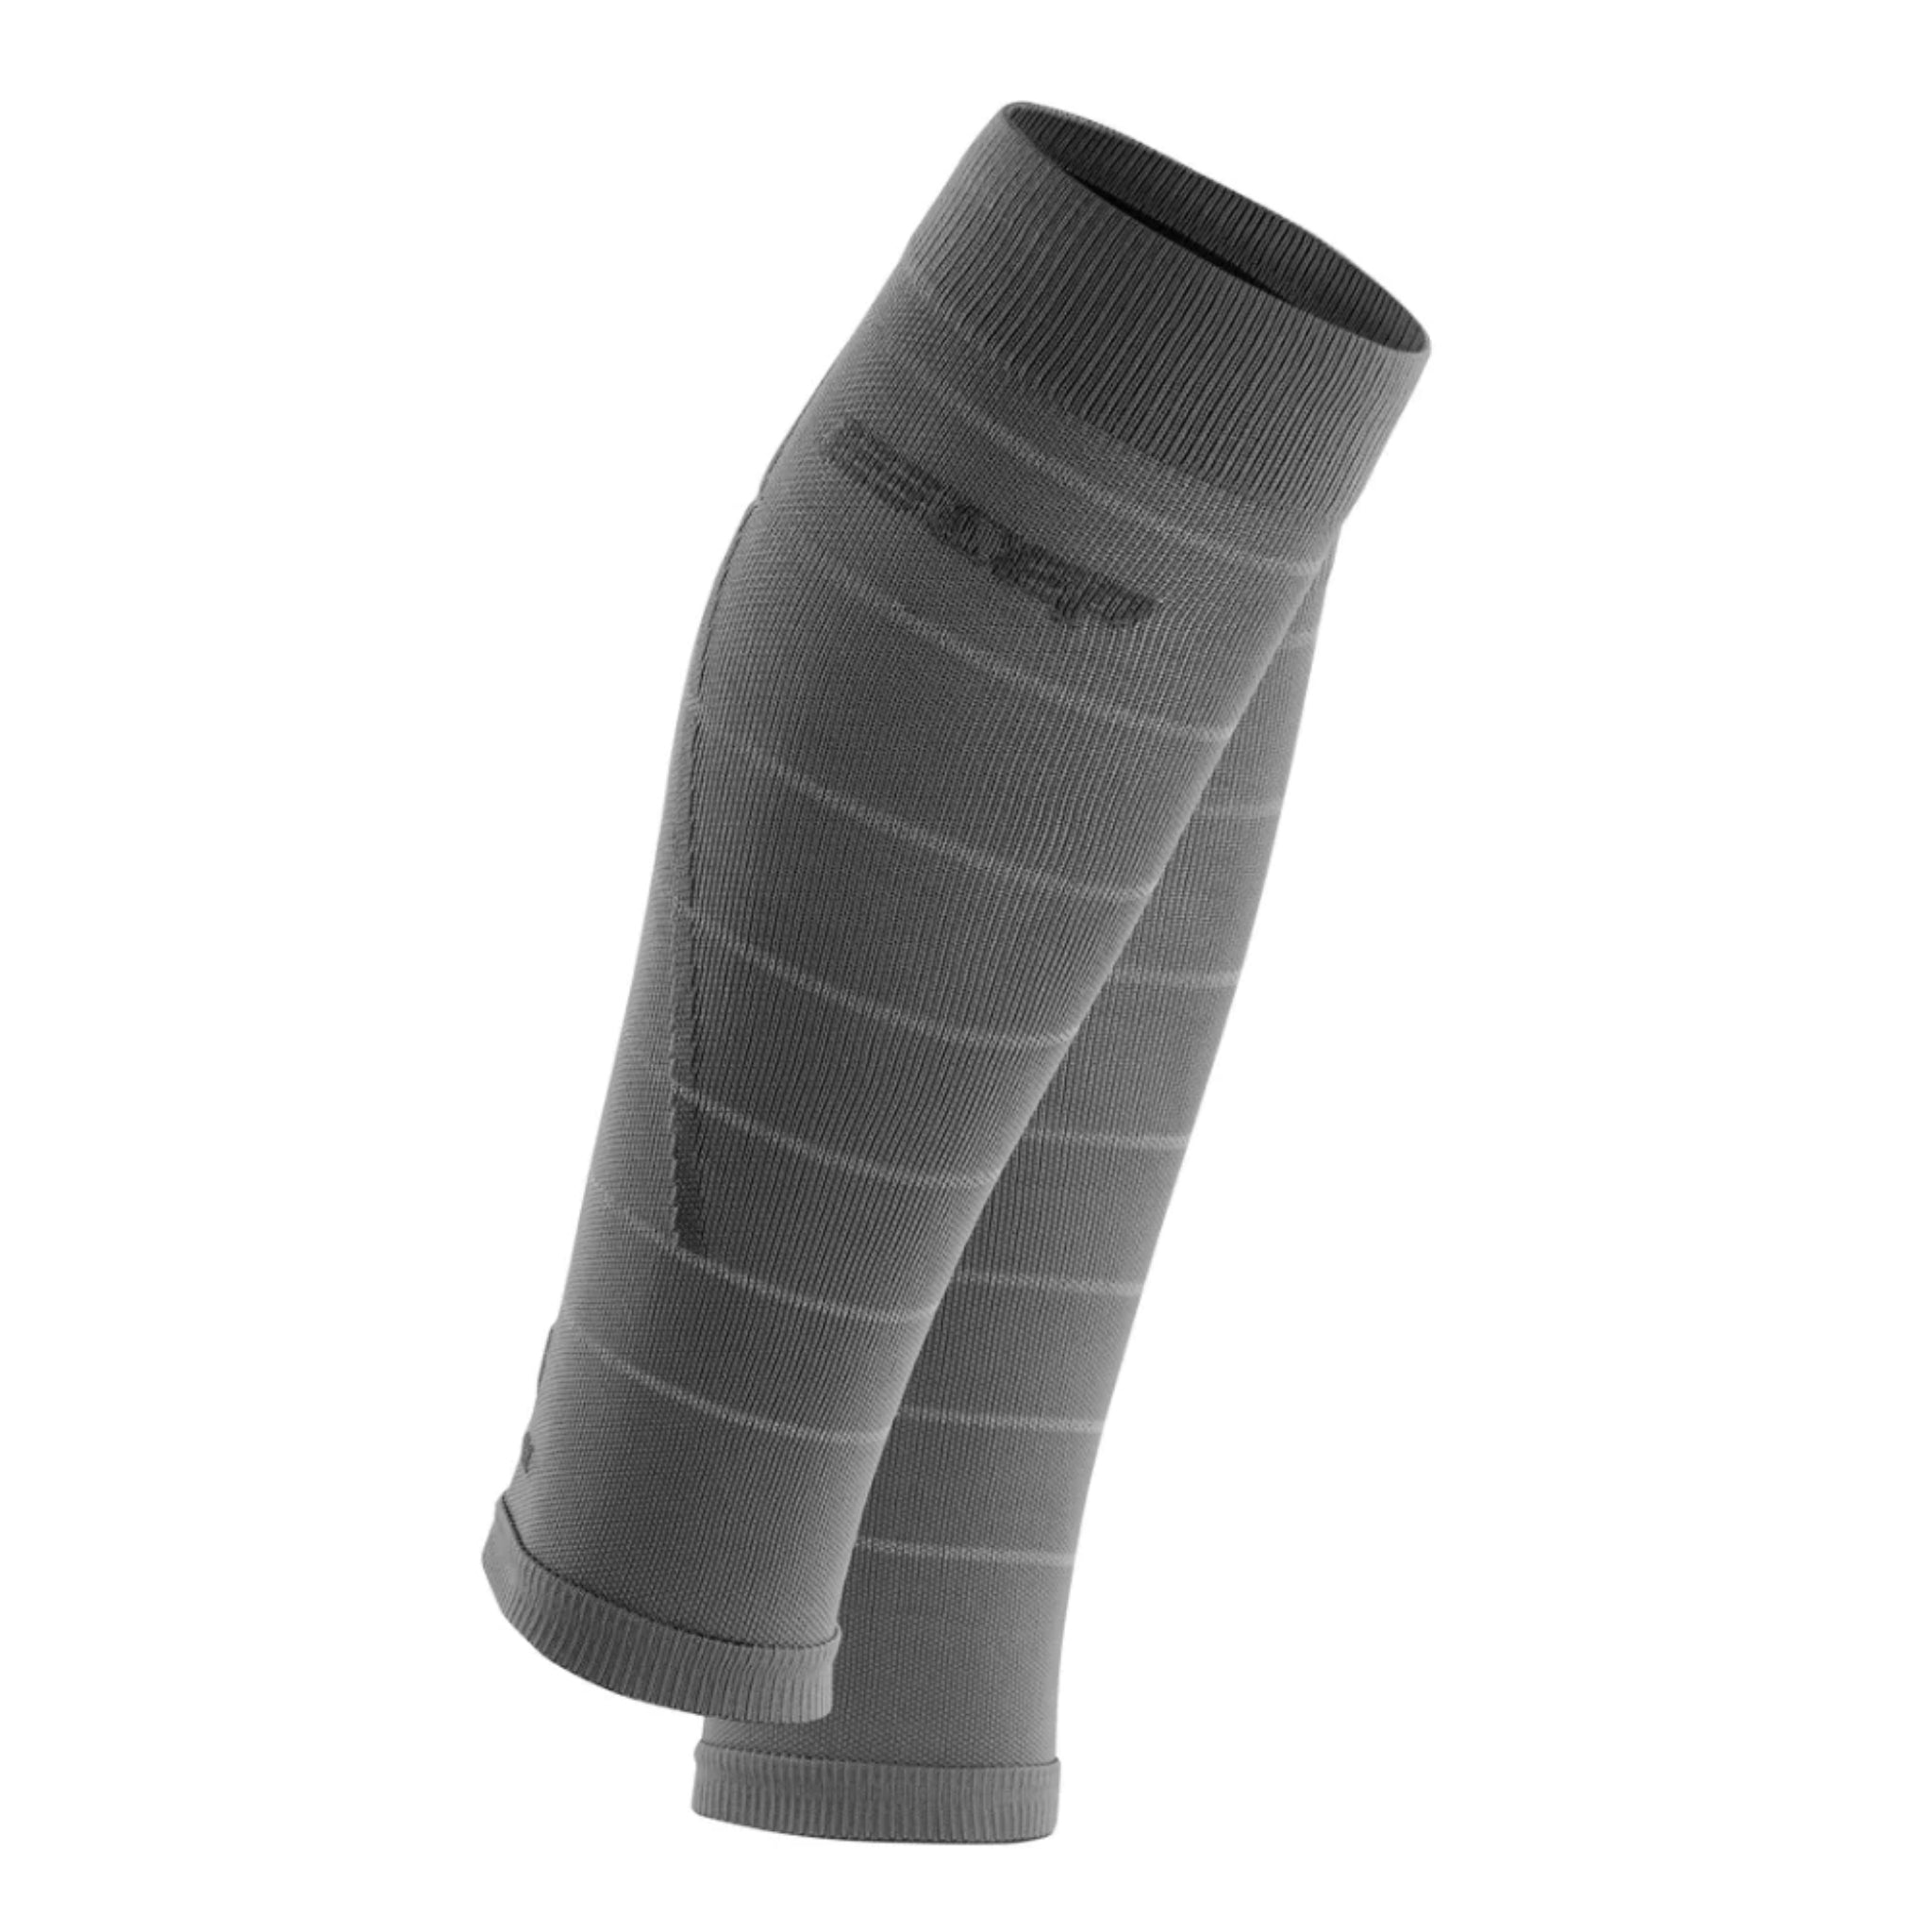 Reflective Compression Calf Sleeves | Women